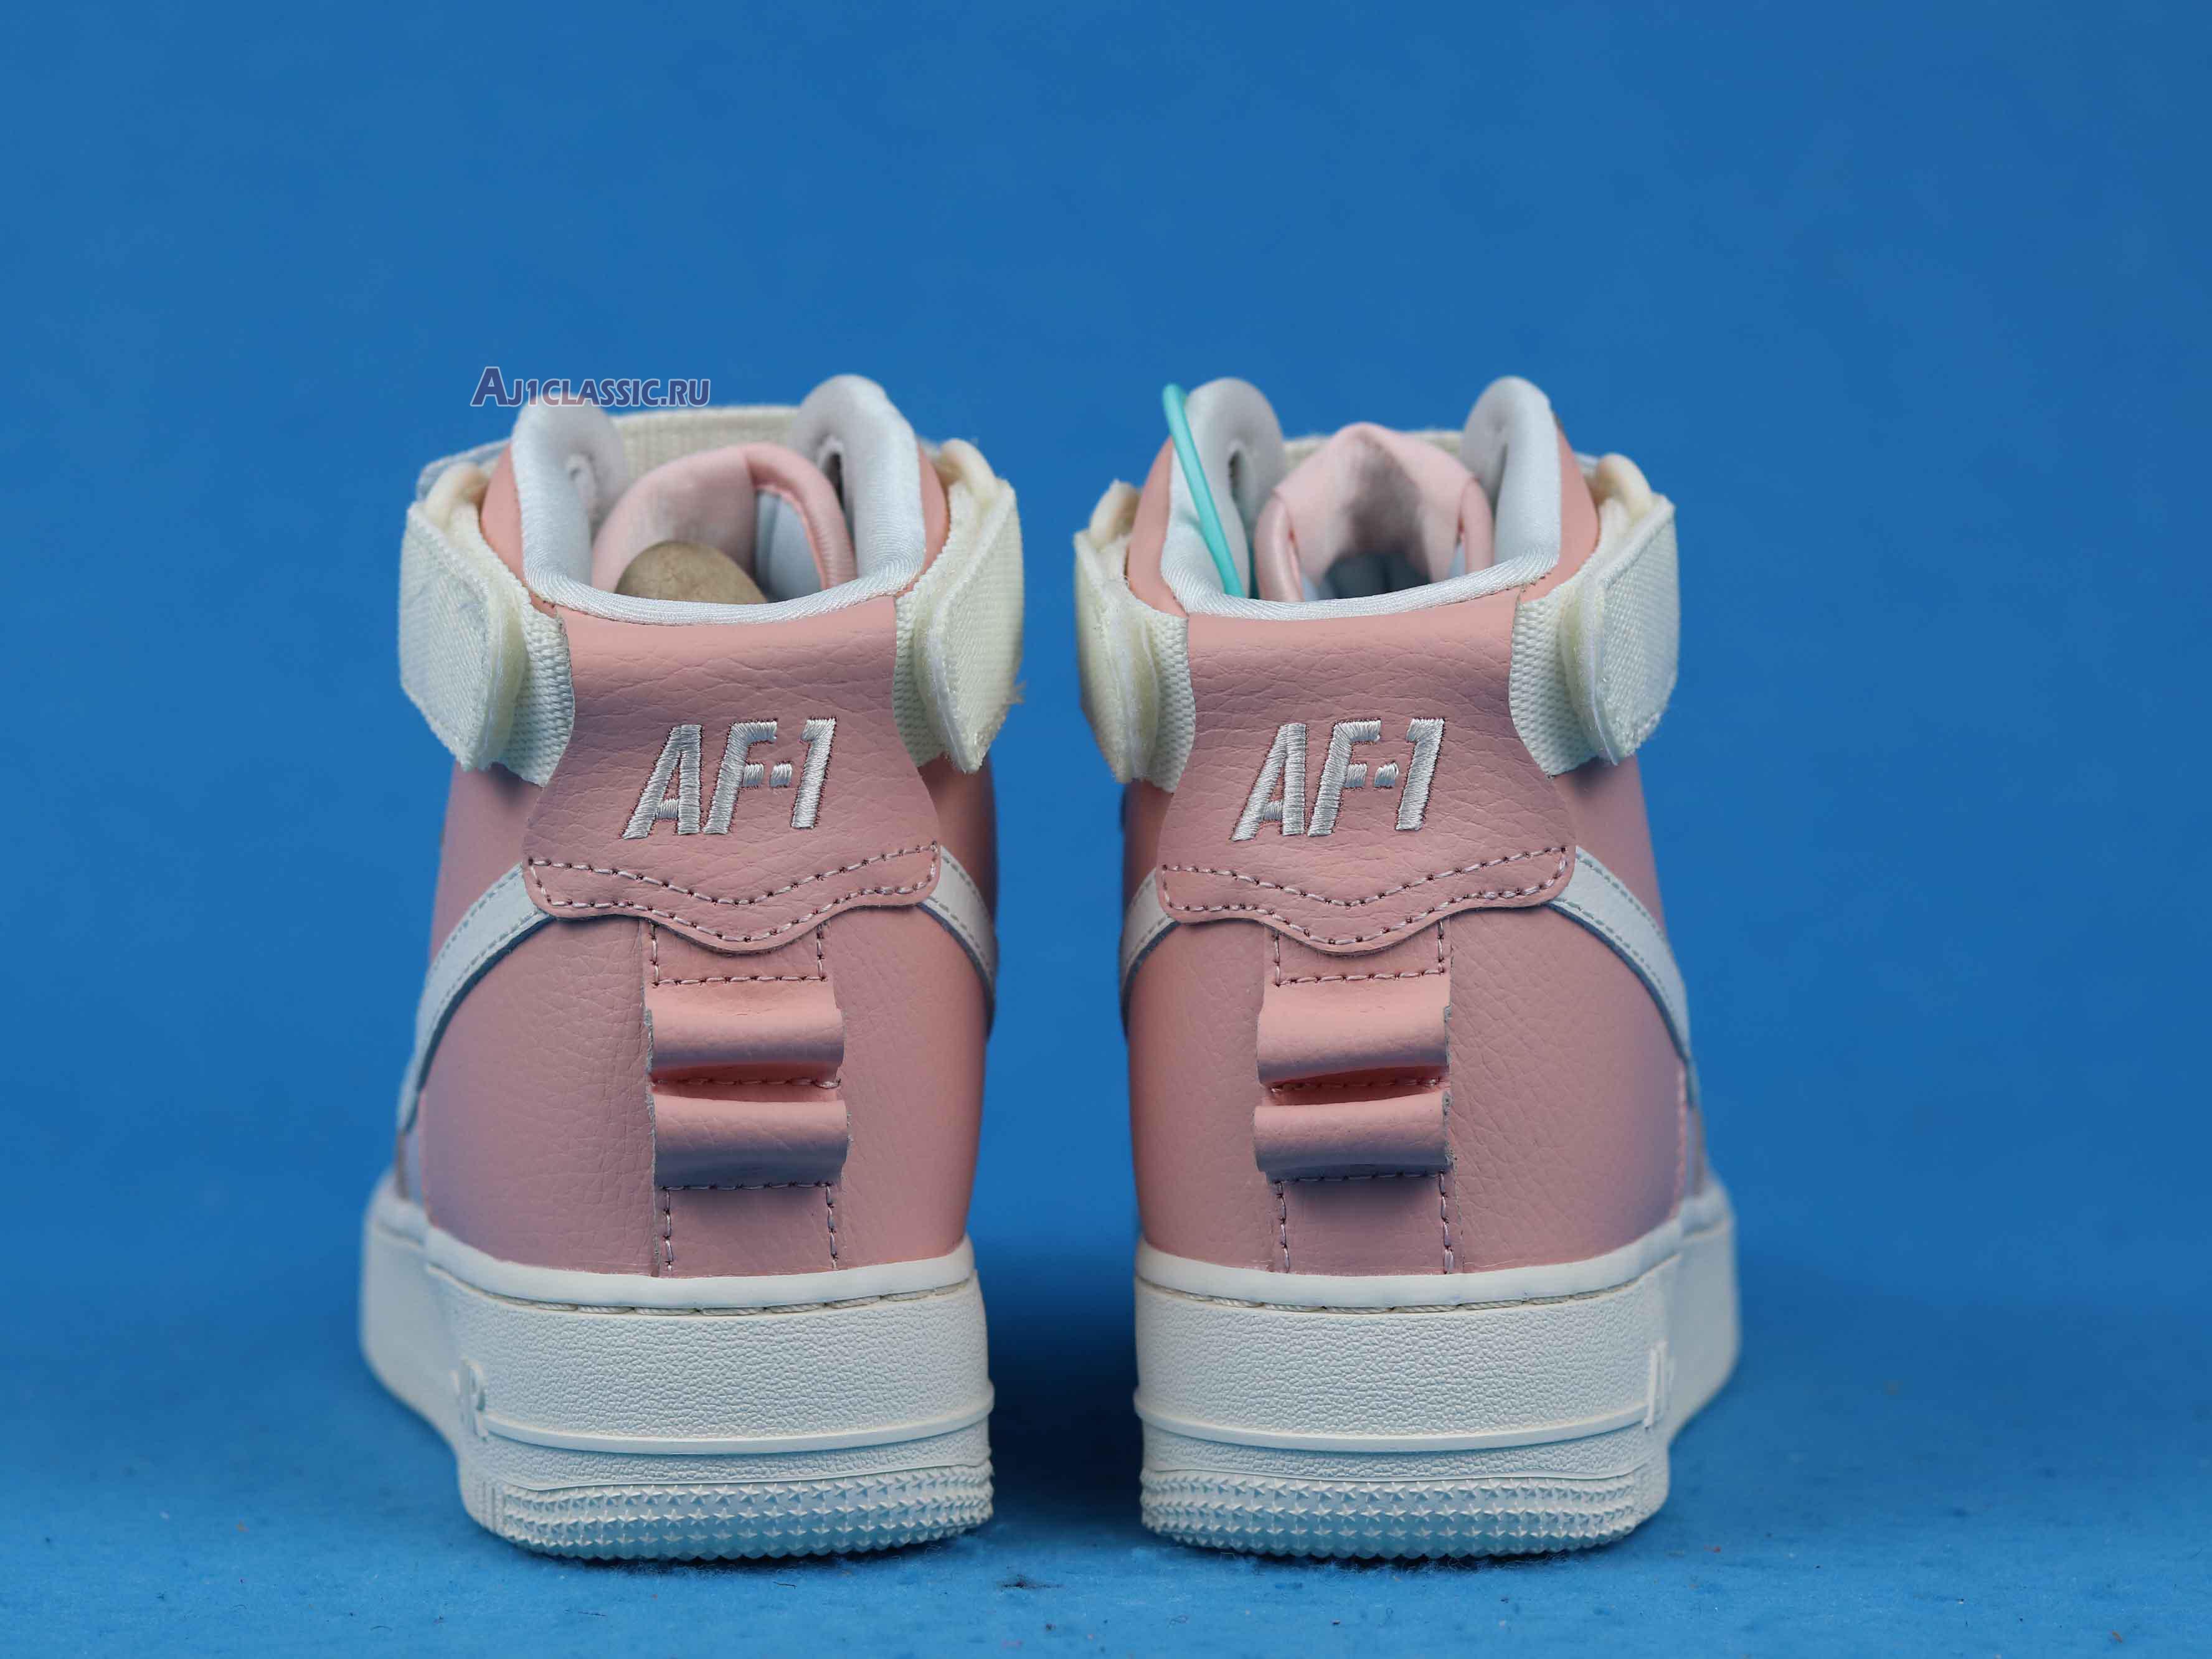 Nike Wmns Air Force 1 High Utility "Force is Female" CQ4810-621